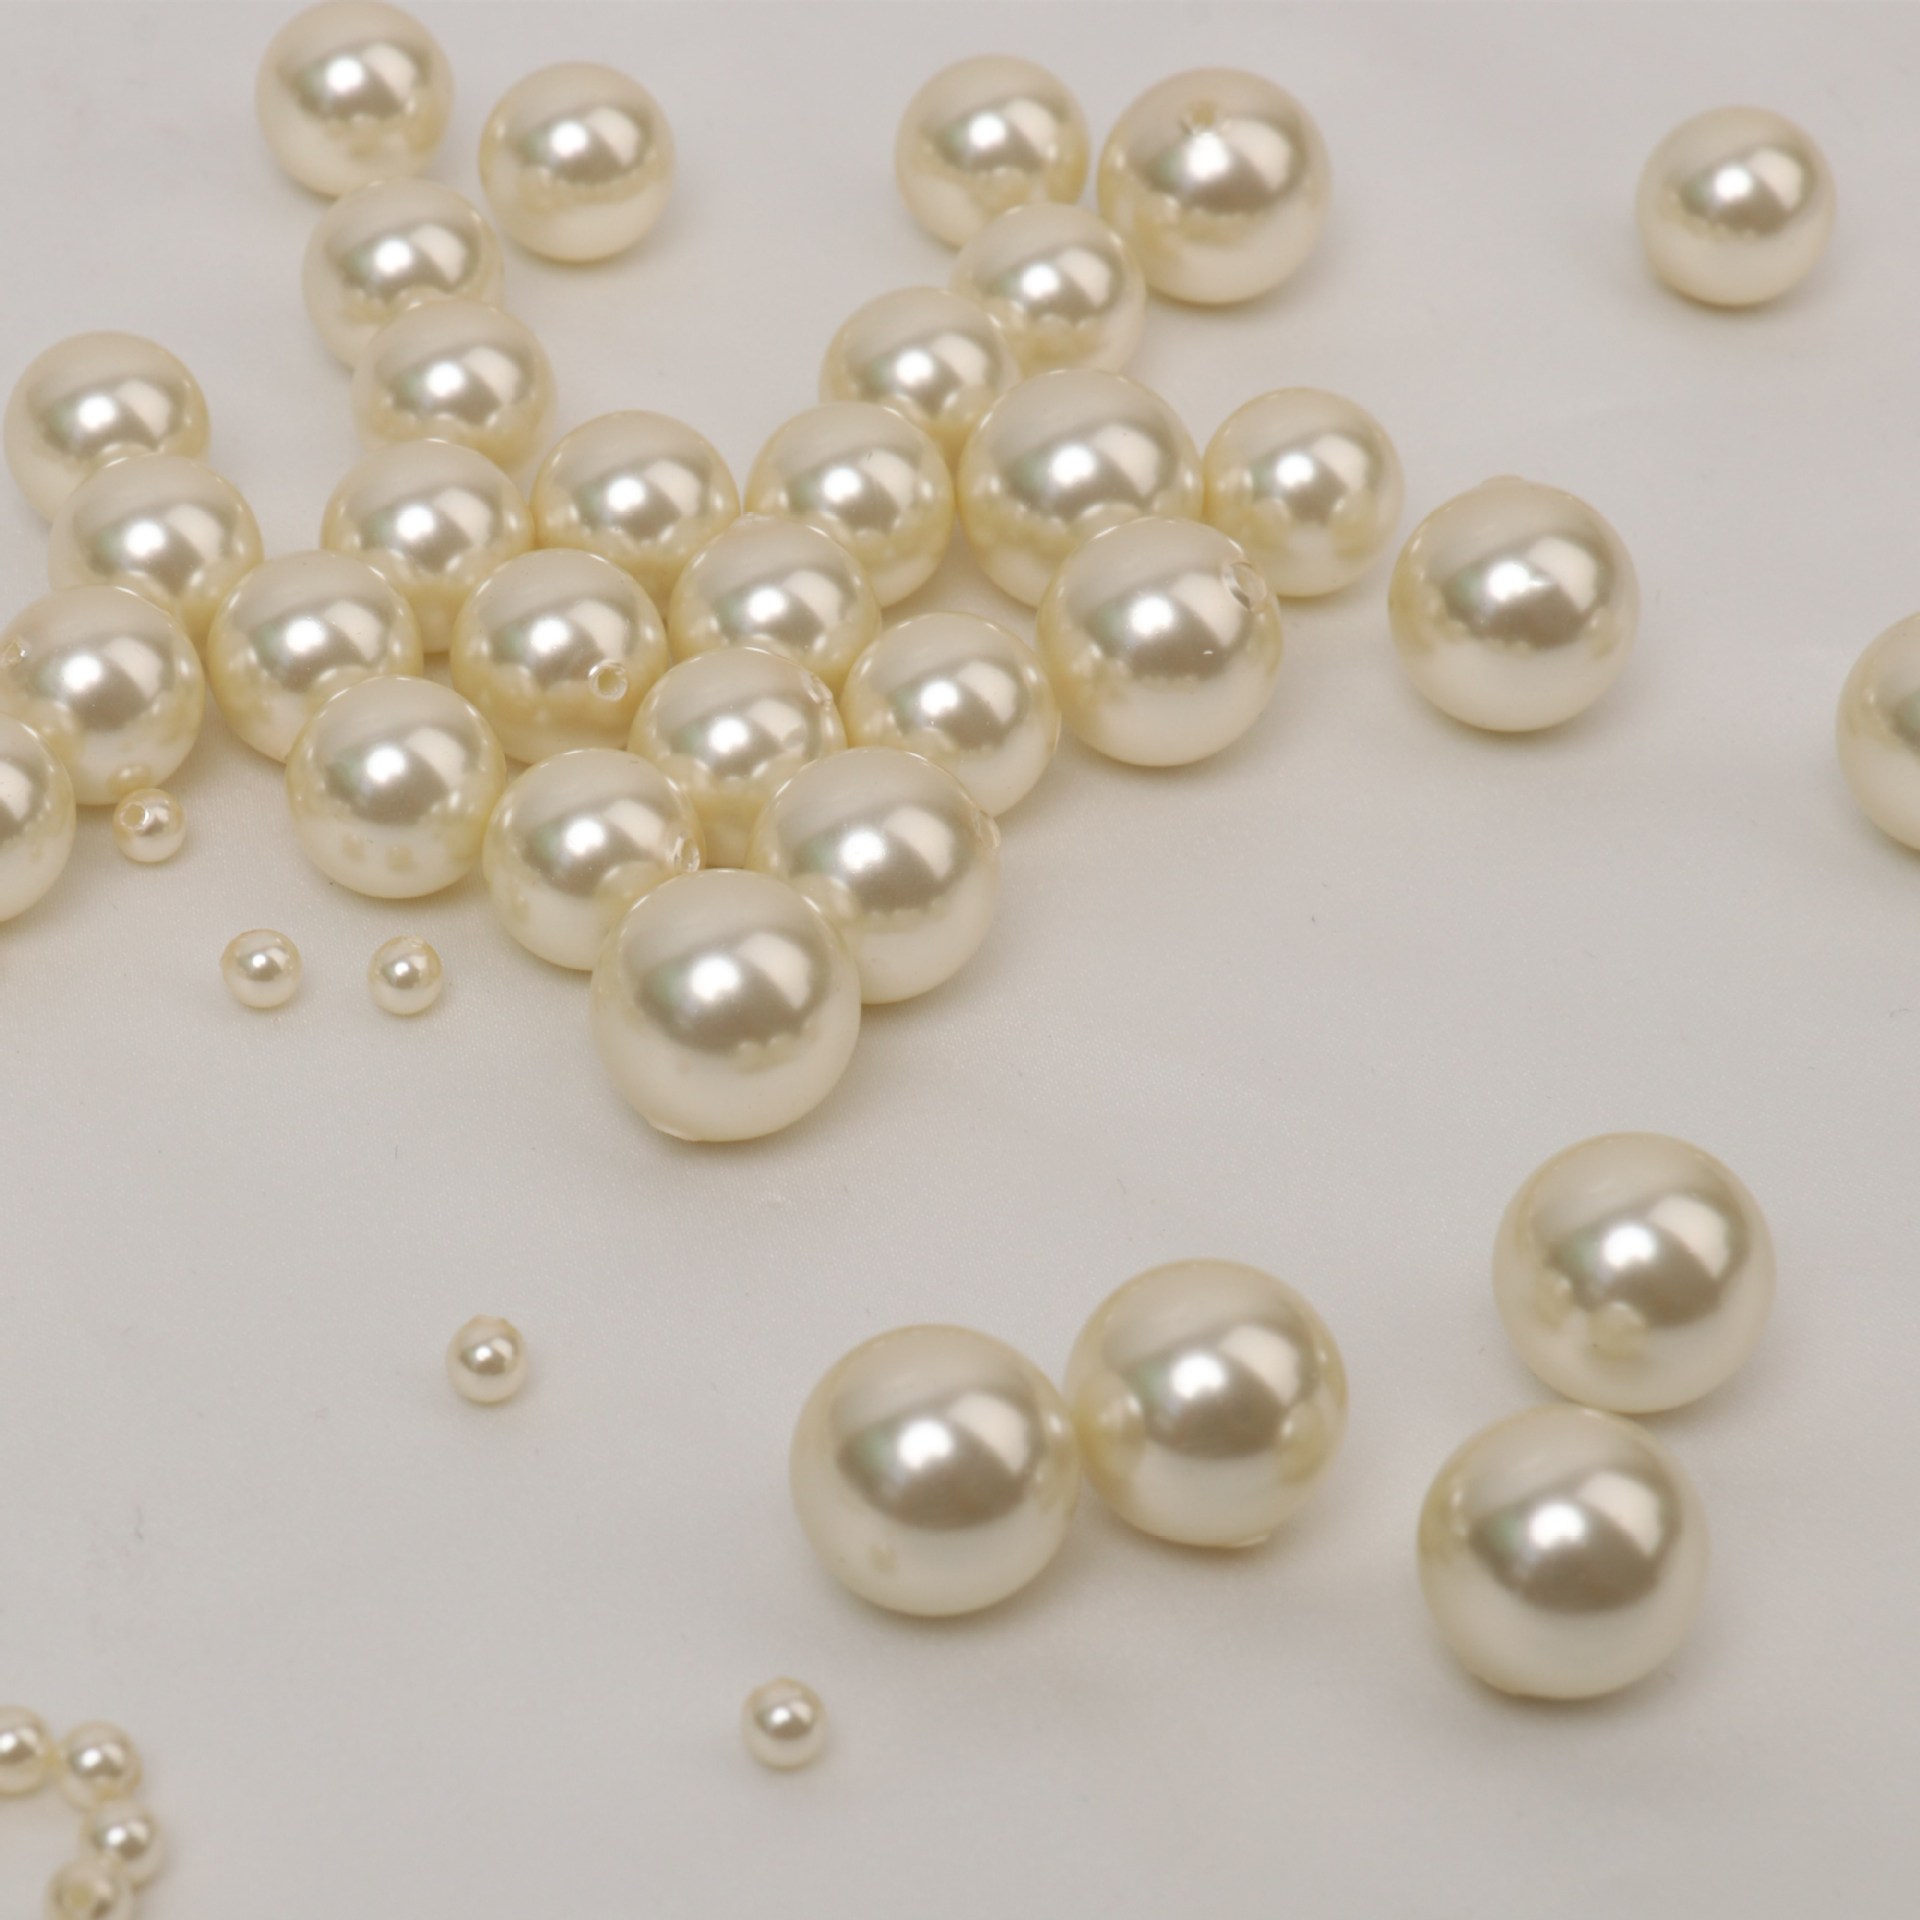 Pearl off-white 10mm